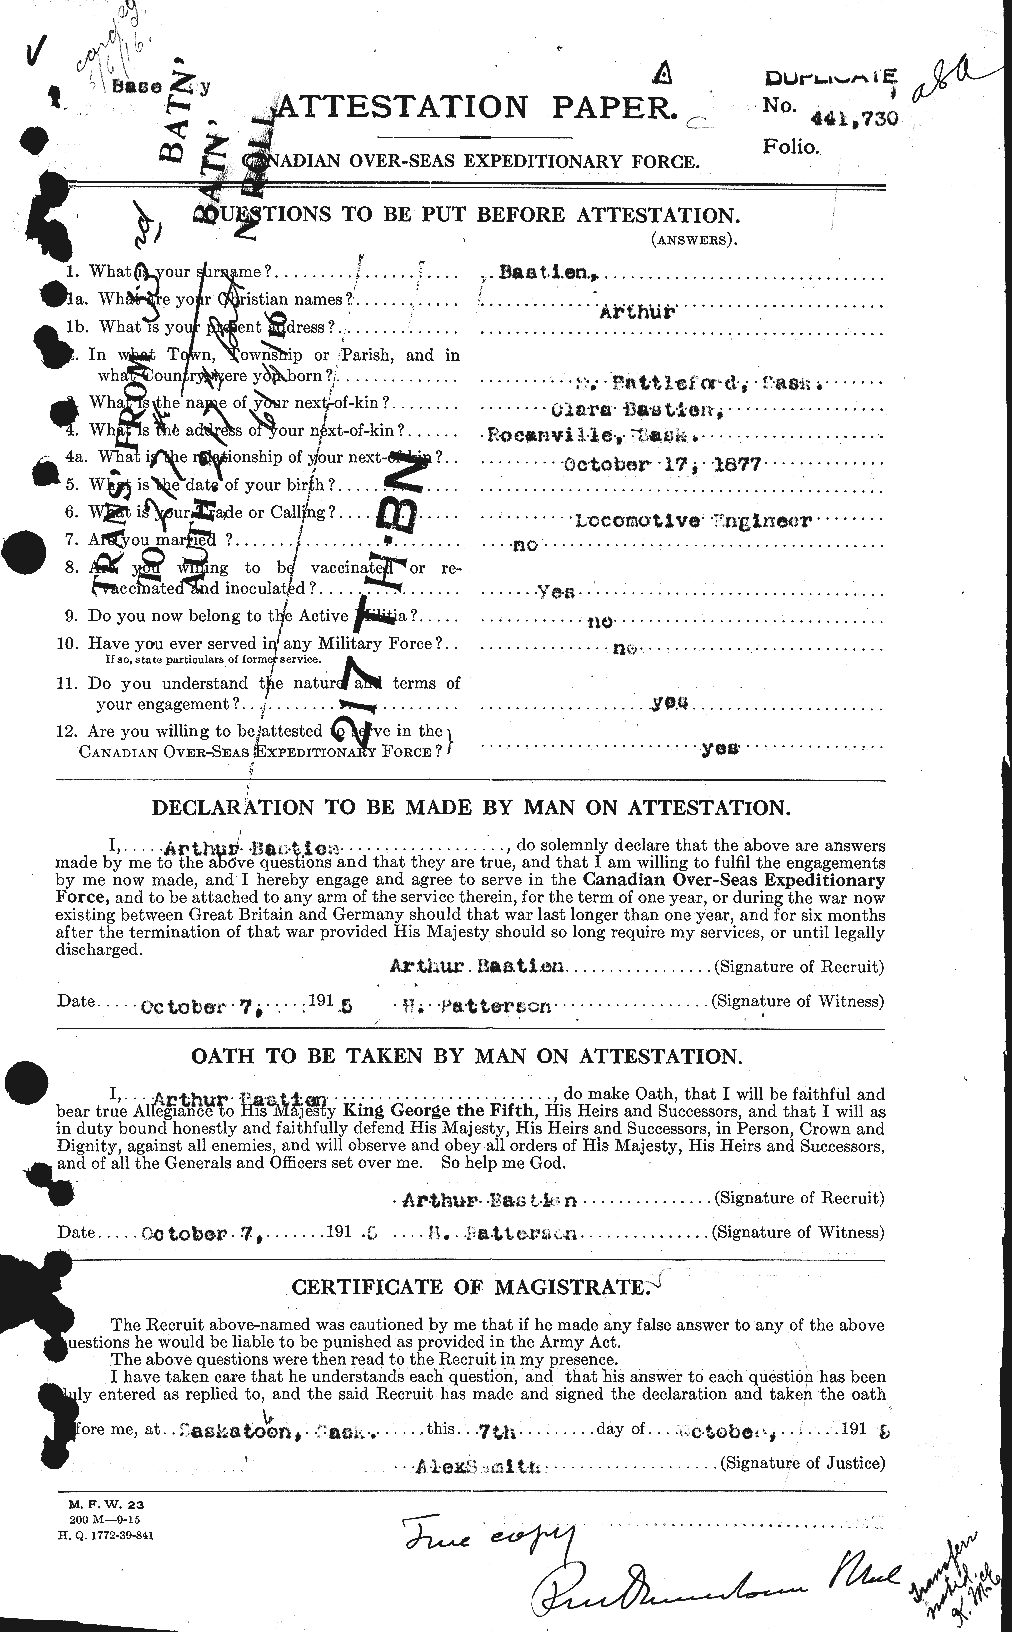 Personnel Records of the First World War - CEF 228246a